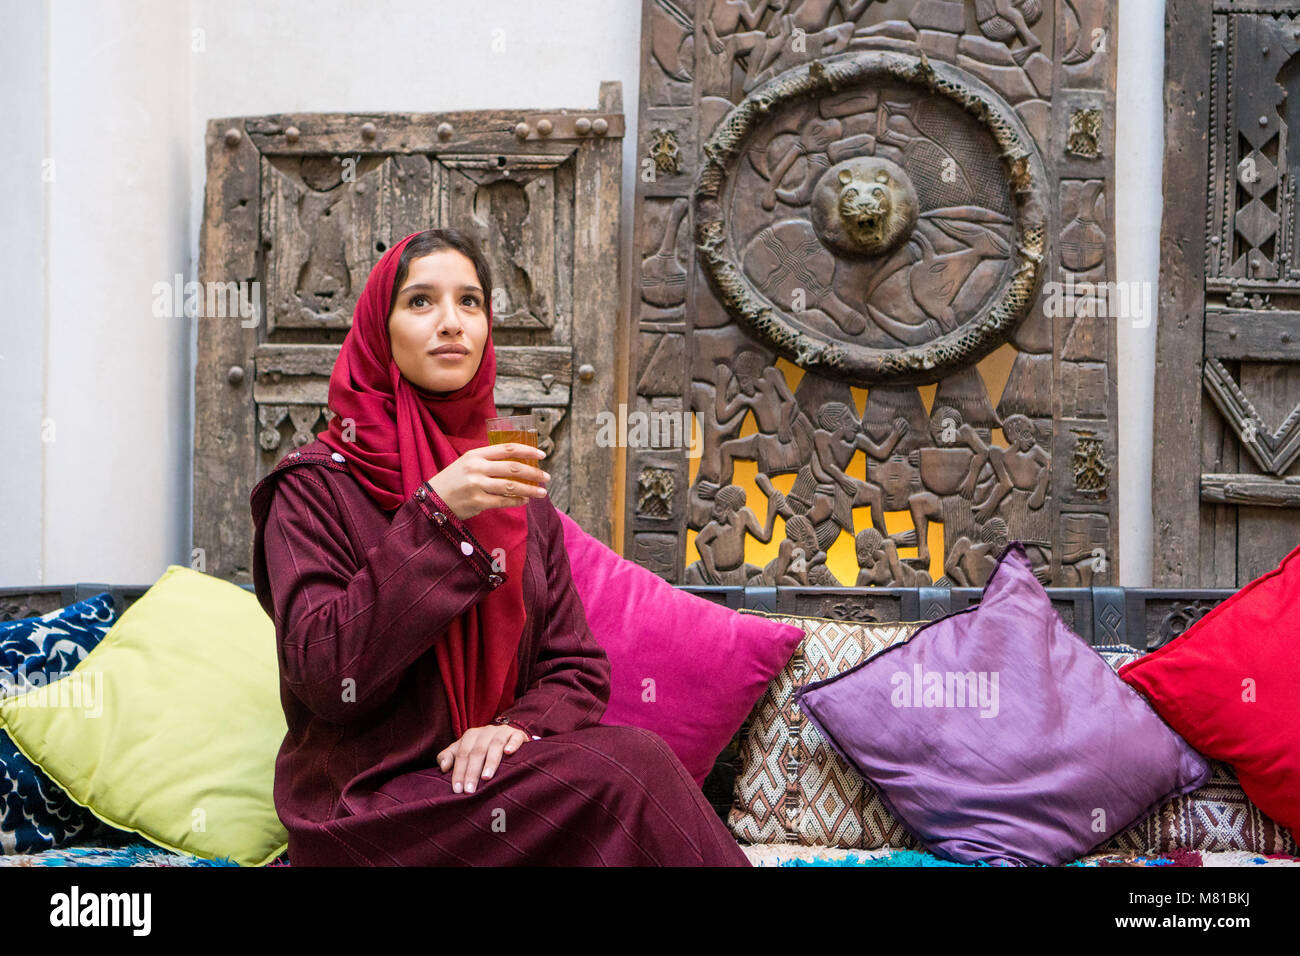 Muslim woman drinking a tea in traditional red clothing with hijab on her head in traditional middle eastern ambient Stock Photo